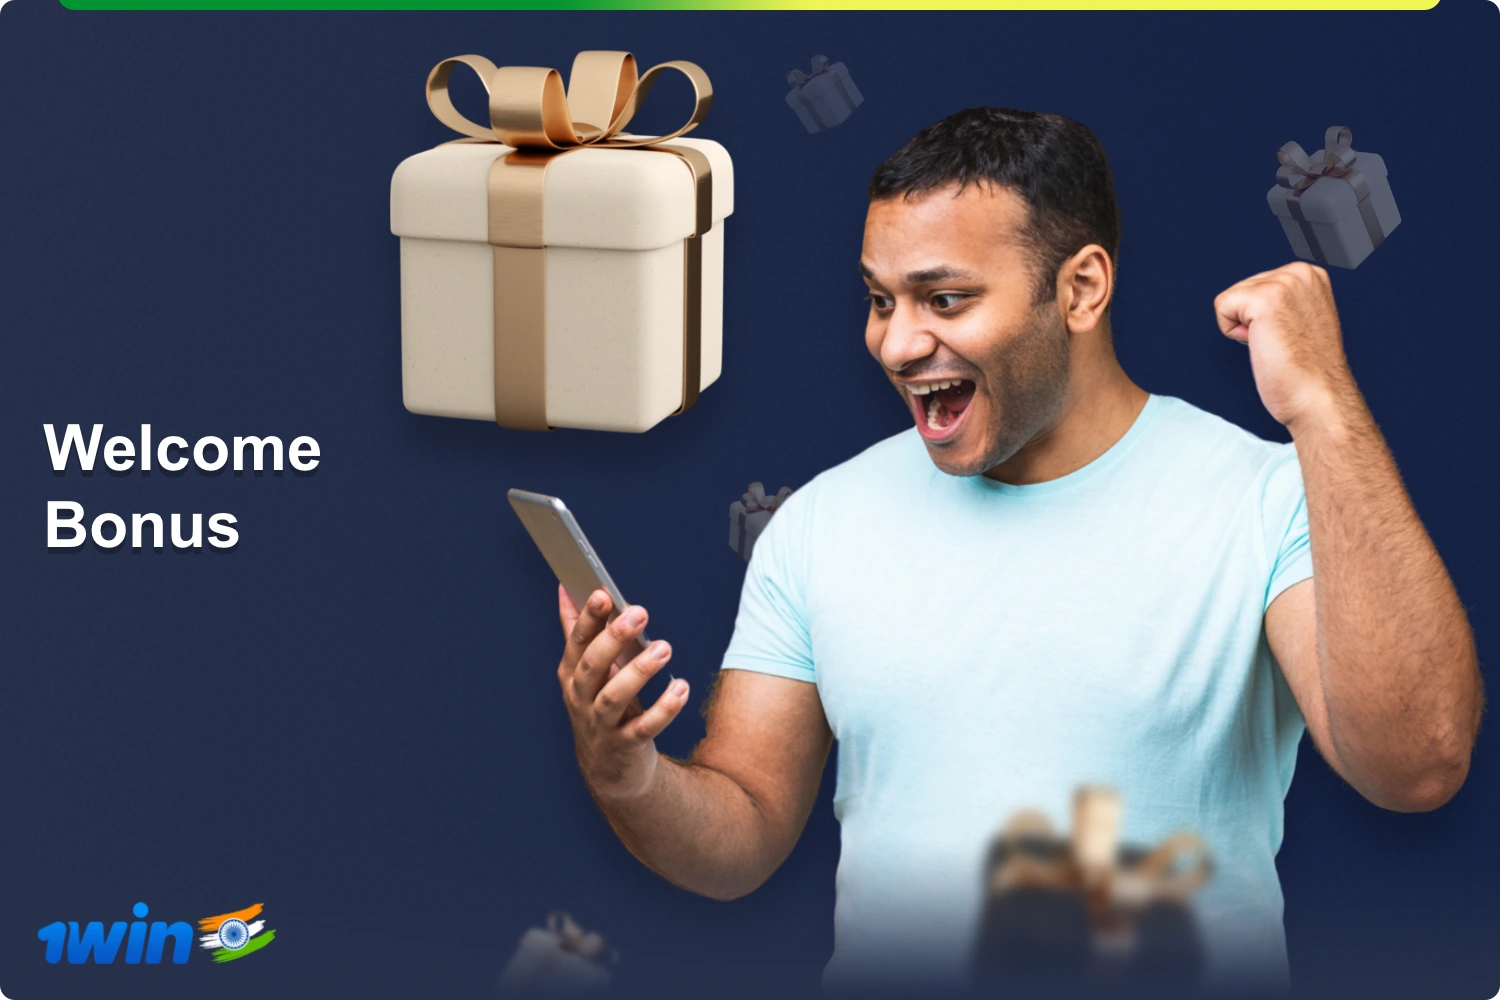 1win Welcome Bonus is available to all users from India who fulfill certain conditions